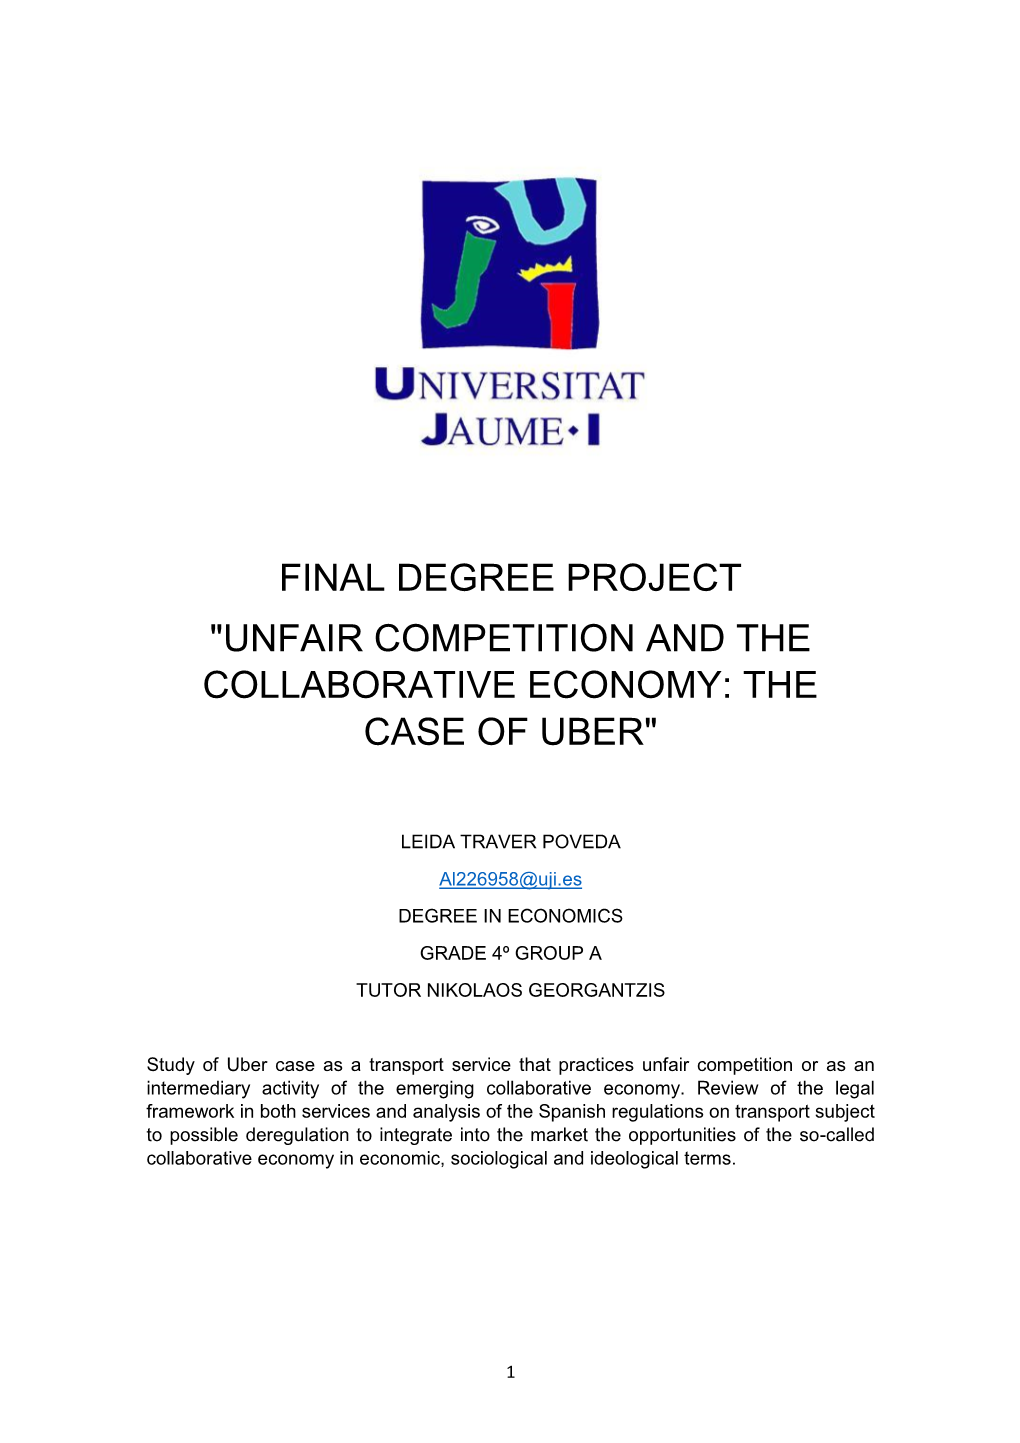 Final Degree Project "Unfair Competition and the Collaborative Economy: the Case of Uber"